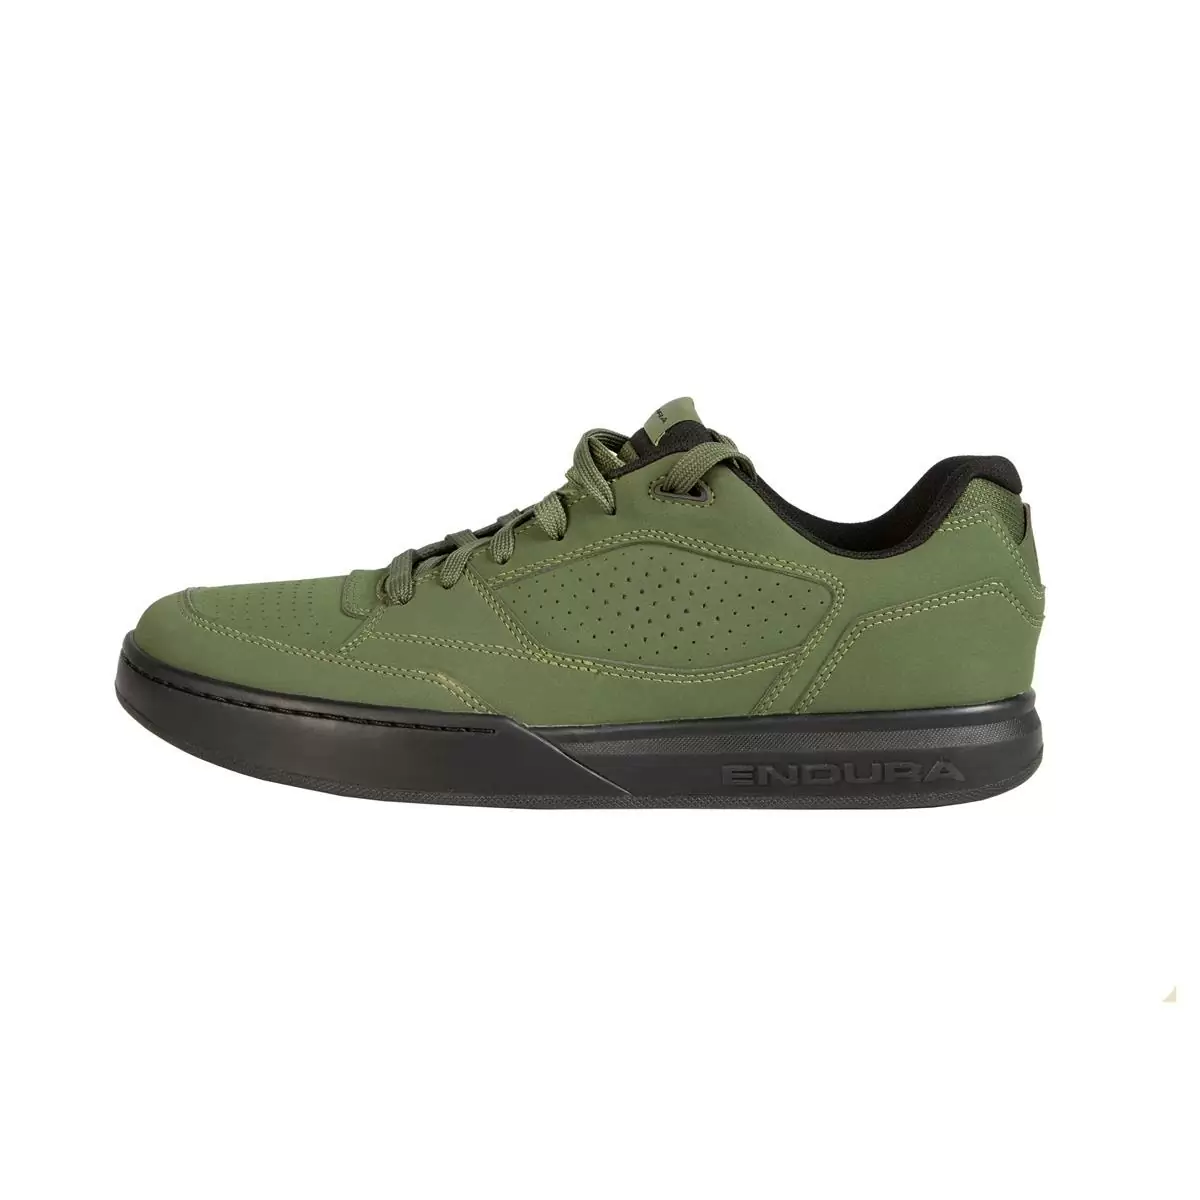 Hummvee Flat Pedal Shoes Green Size 47 #1